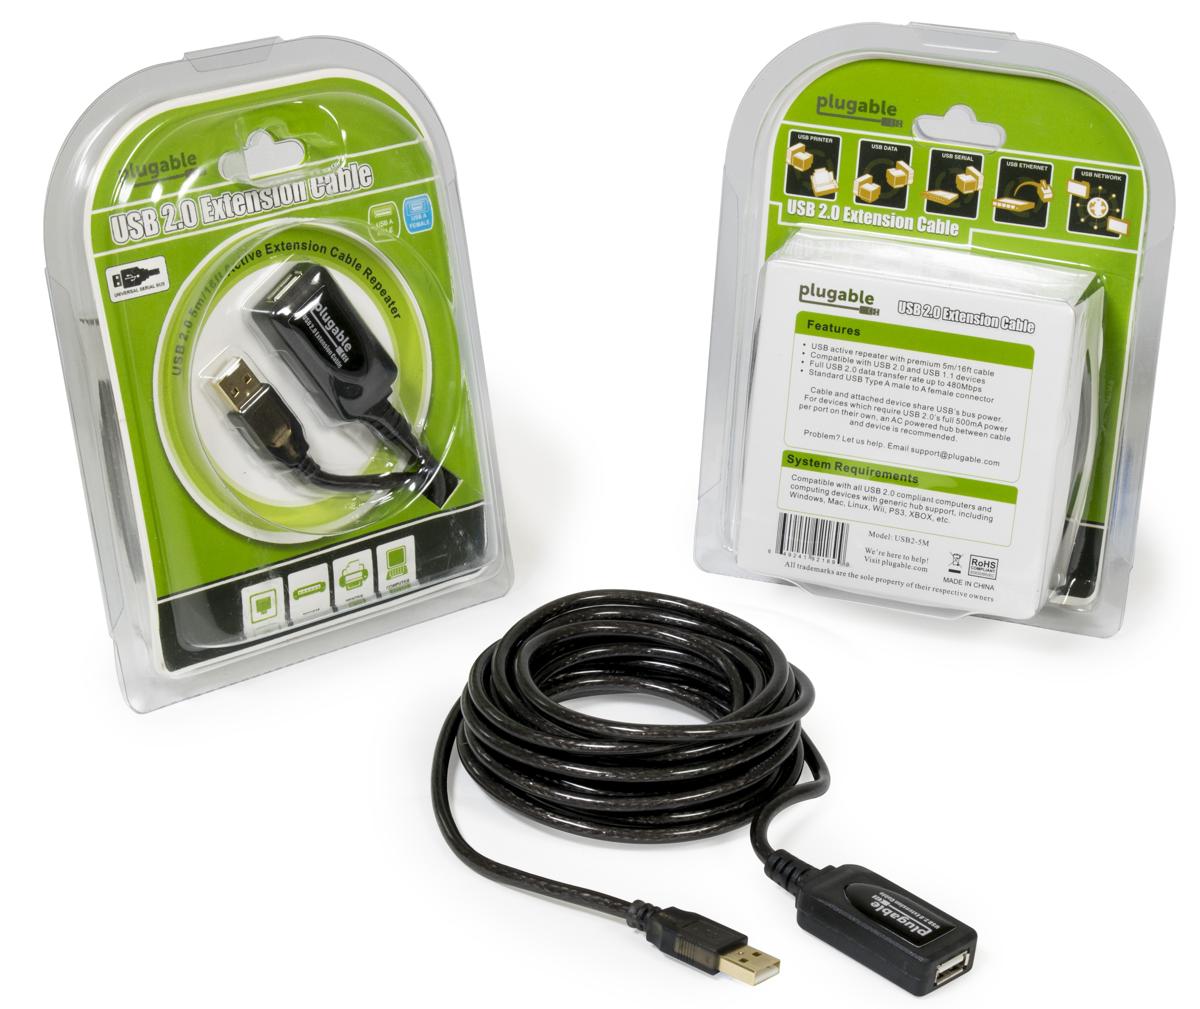 Display of the Plugable USB 2.0 5 meter extension cable and packaging